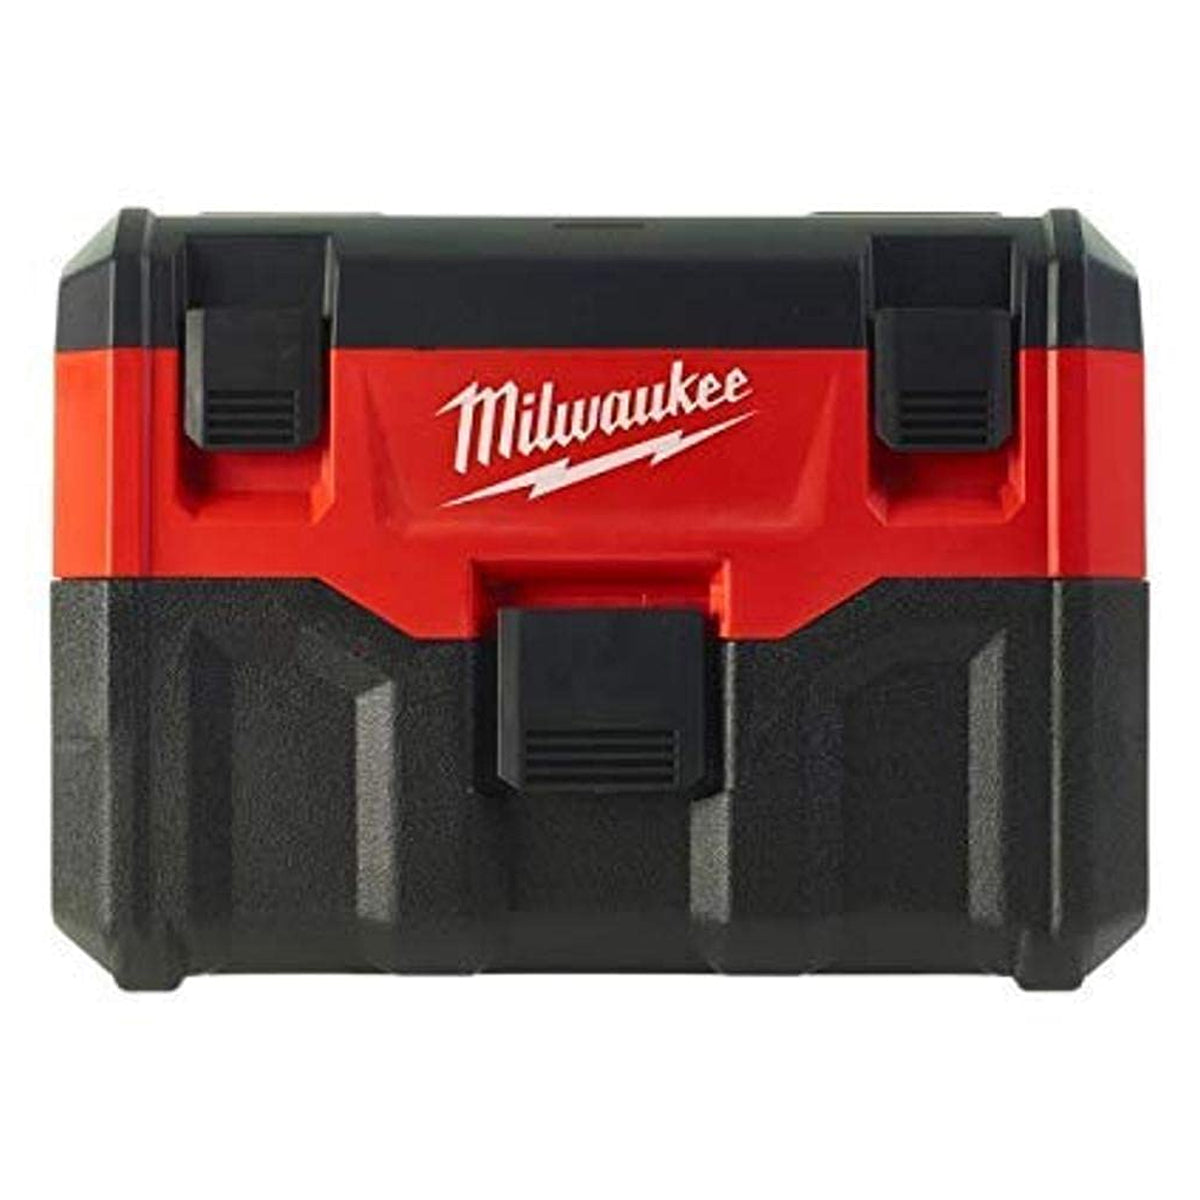 Milwaukee M18VC2-0 18V Wet Dry Vacuum 2nd Generation with 1 x 5.0Ah Battery & Charger